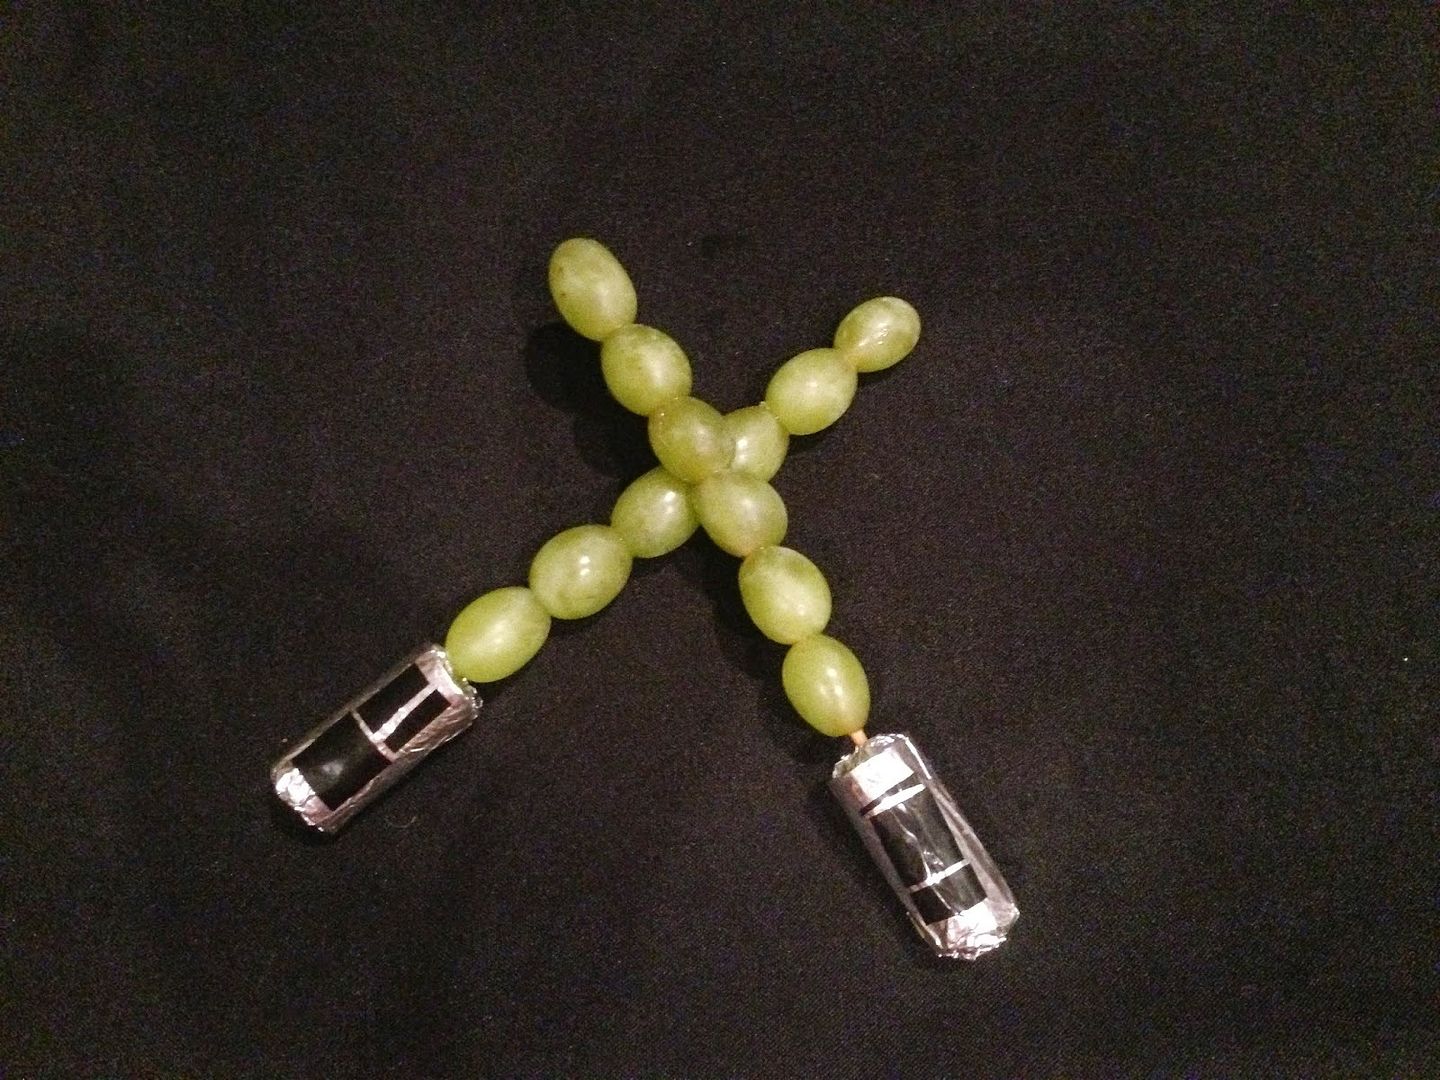 DIY: How to make lightsaber grape skewers for a Star Wars party from Bridgey Widgey